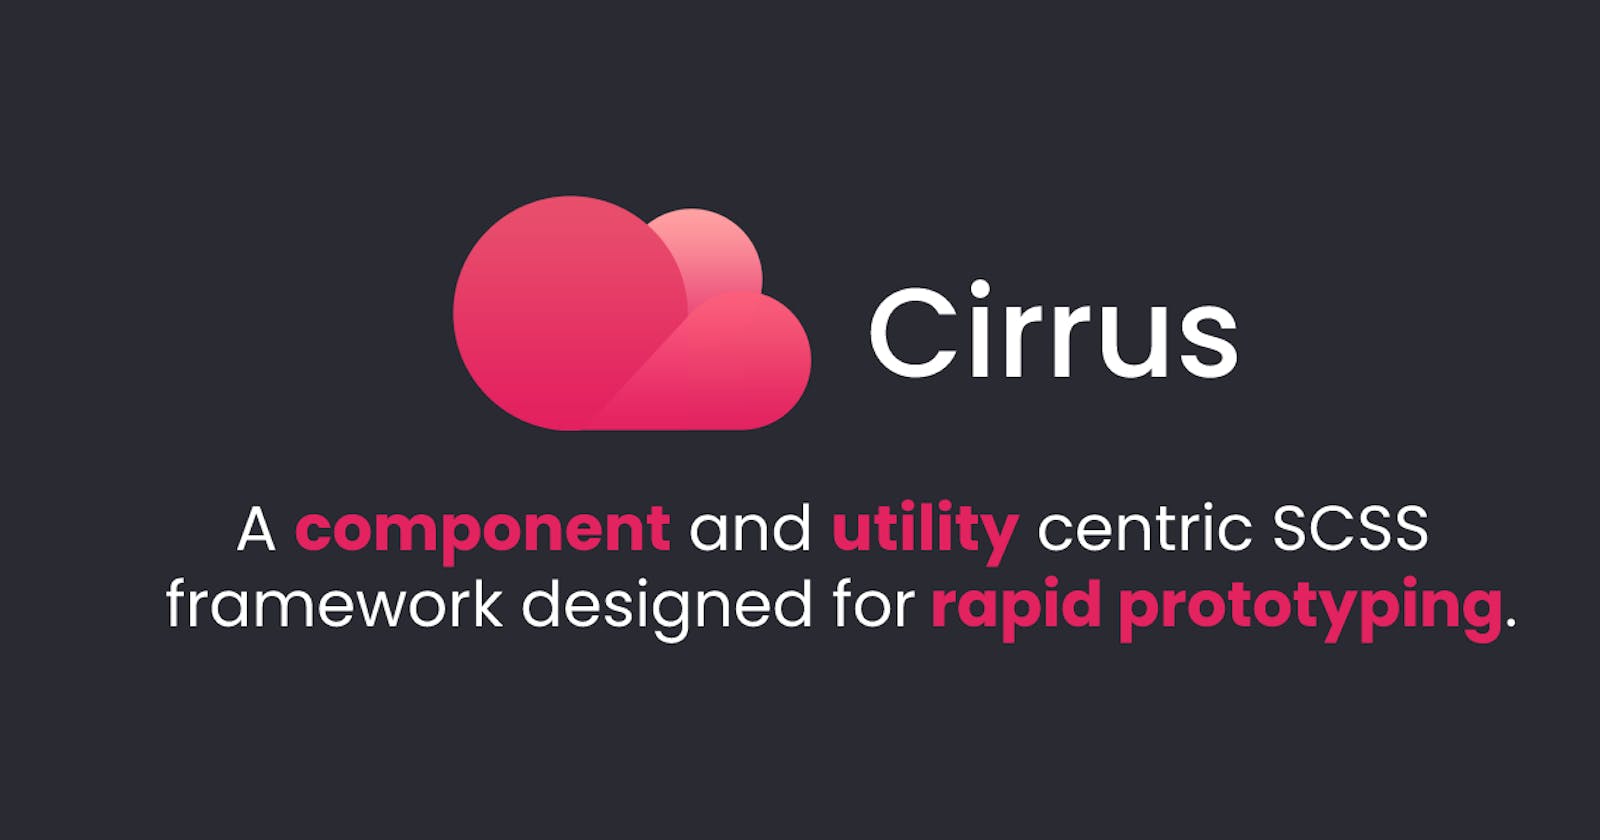 Released Cirrus 0.6.1 🚀 - A component and utility centric SCSS framework
designed for rapid prototyping.